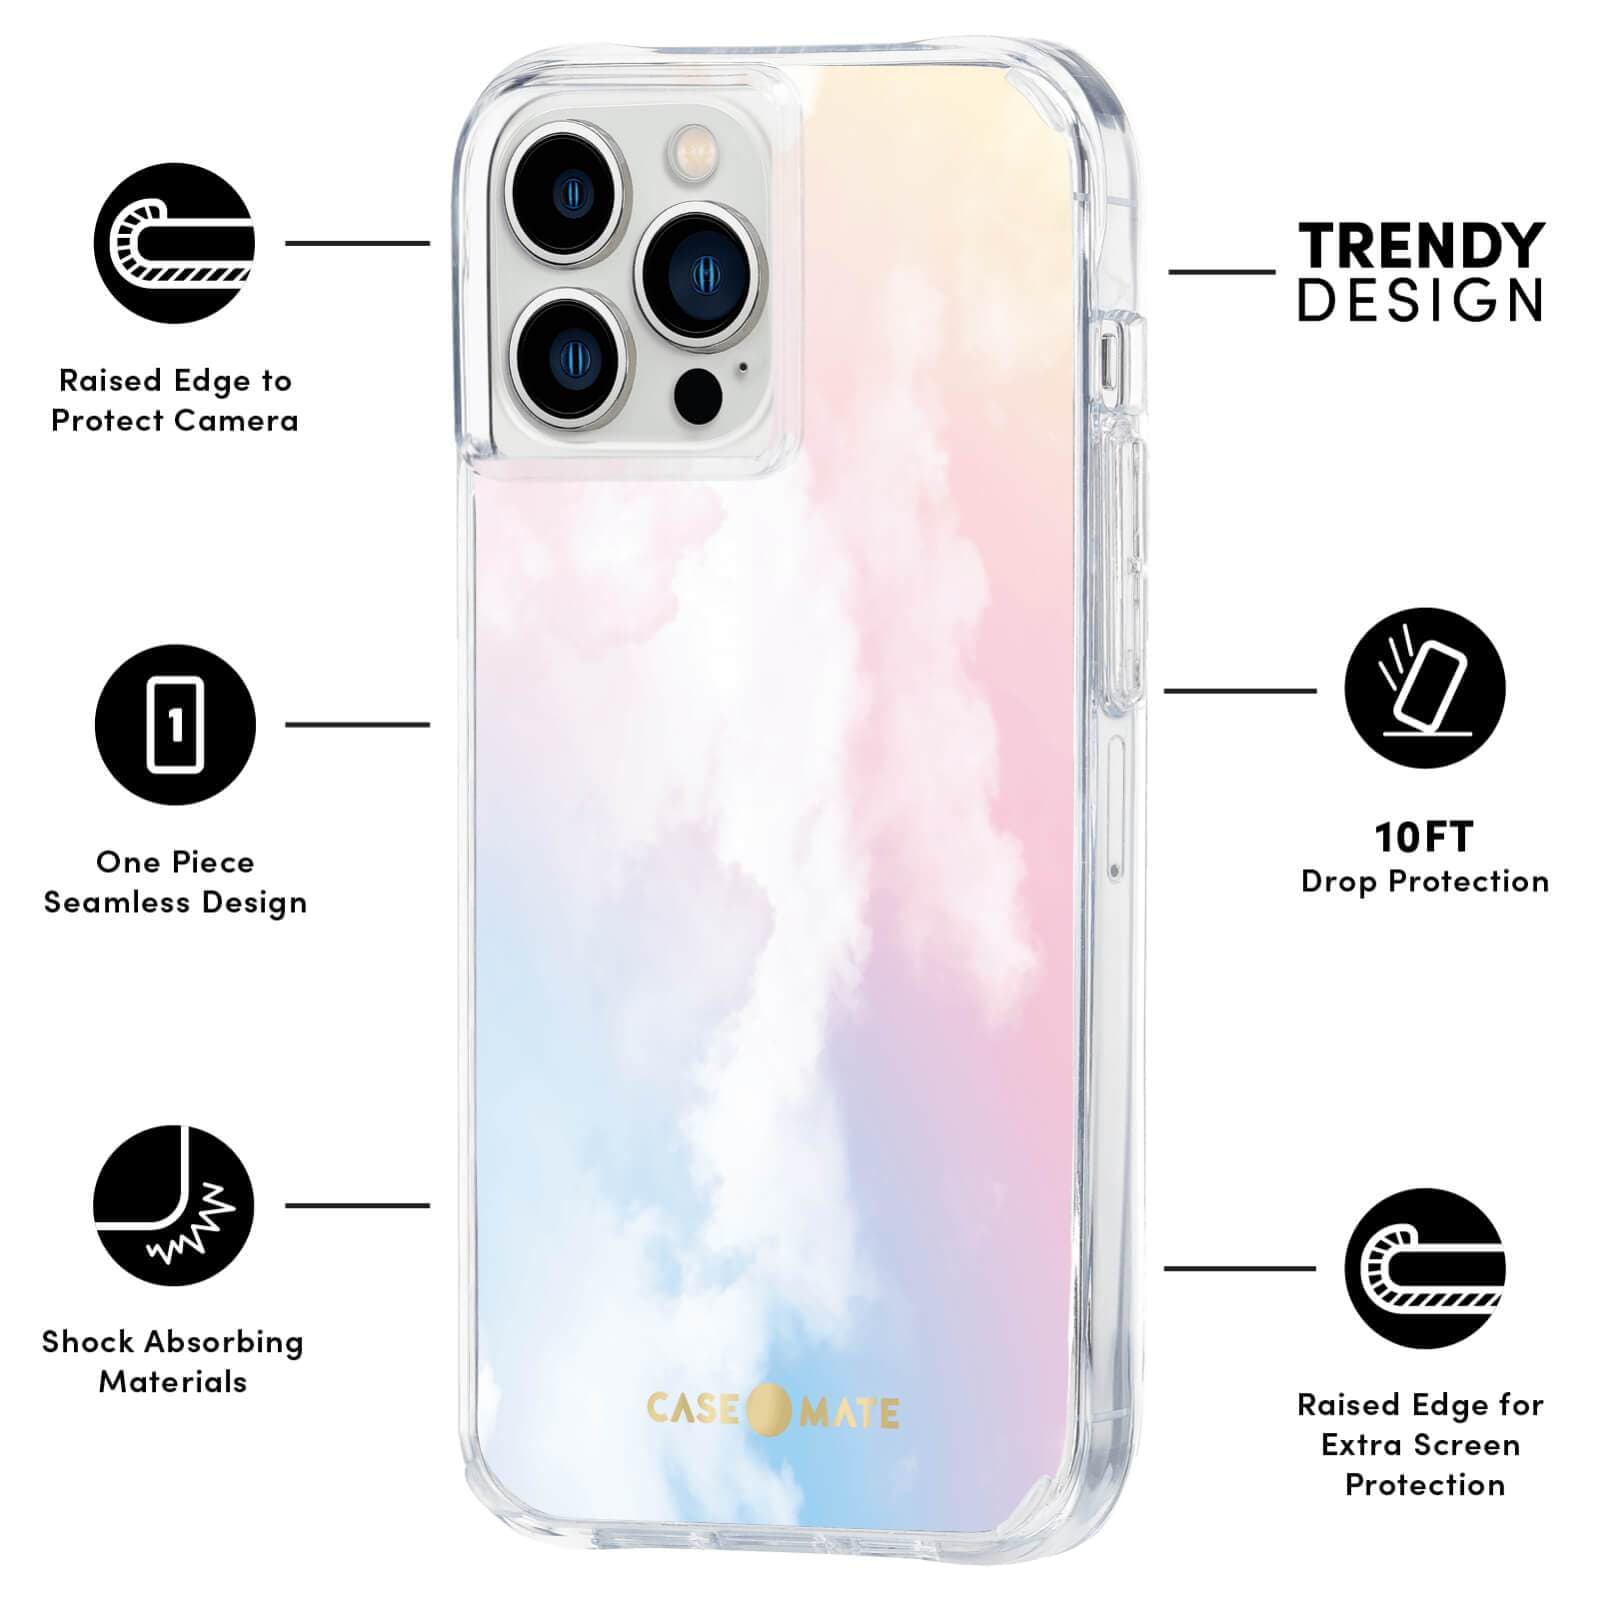 FEATURES: RAISED CAMERA TO PROTECT CAMERA, ONE PIECE SEAMLESS DESIGN, SHOCK ABSORBING MATERIALS, TRENDY DESIGN, 10 FT DROP PROTECTION, RAISED EDGE FOR EXTRA SCREEN PROTECTION. COLOR::CLOUD 9